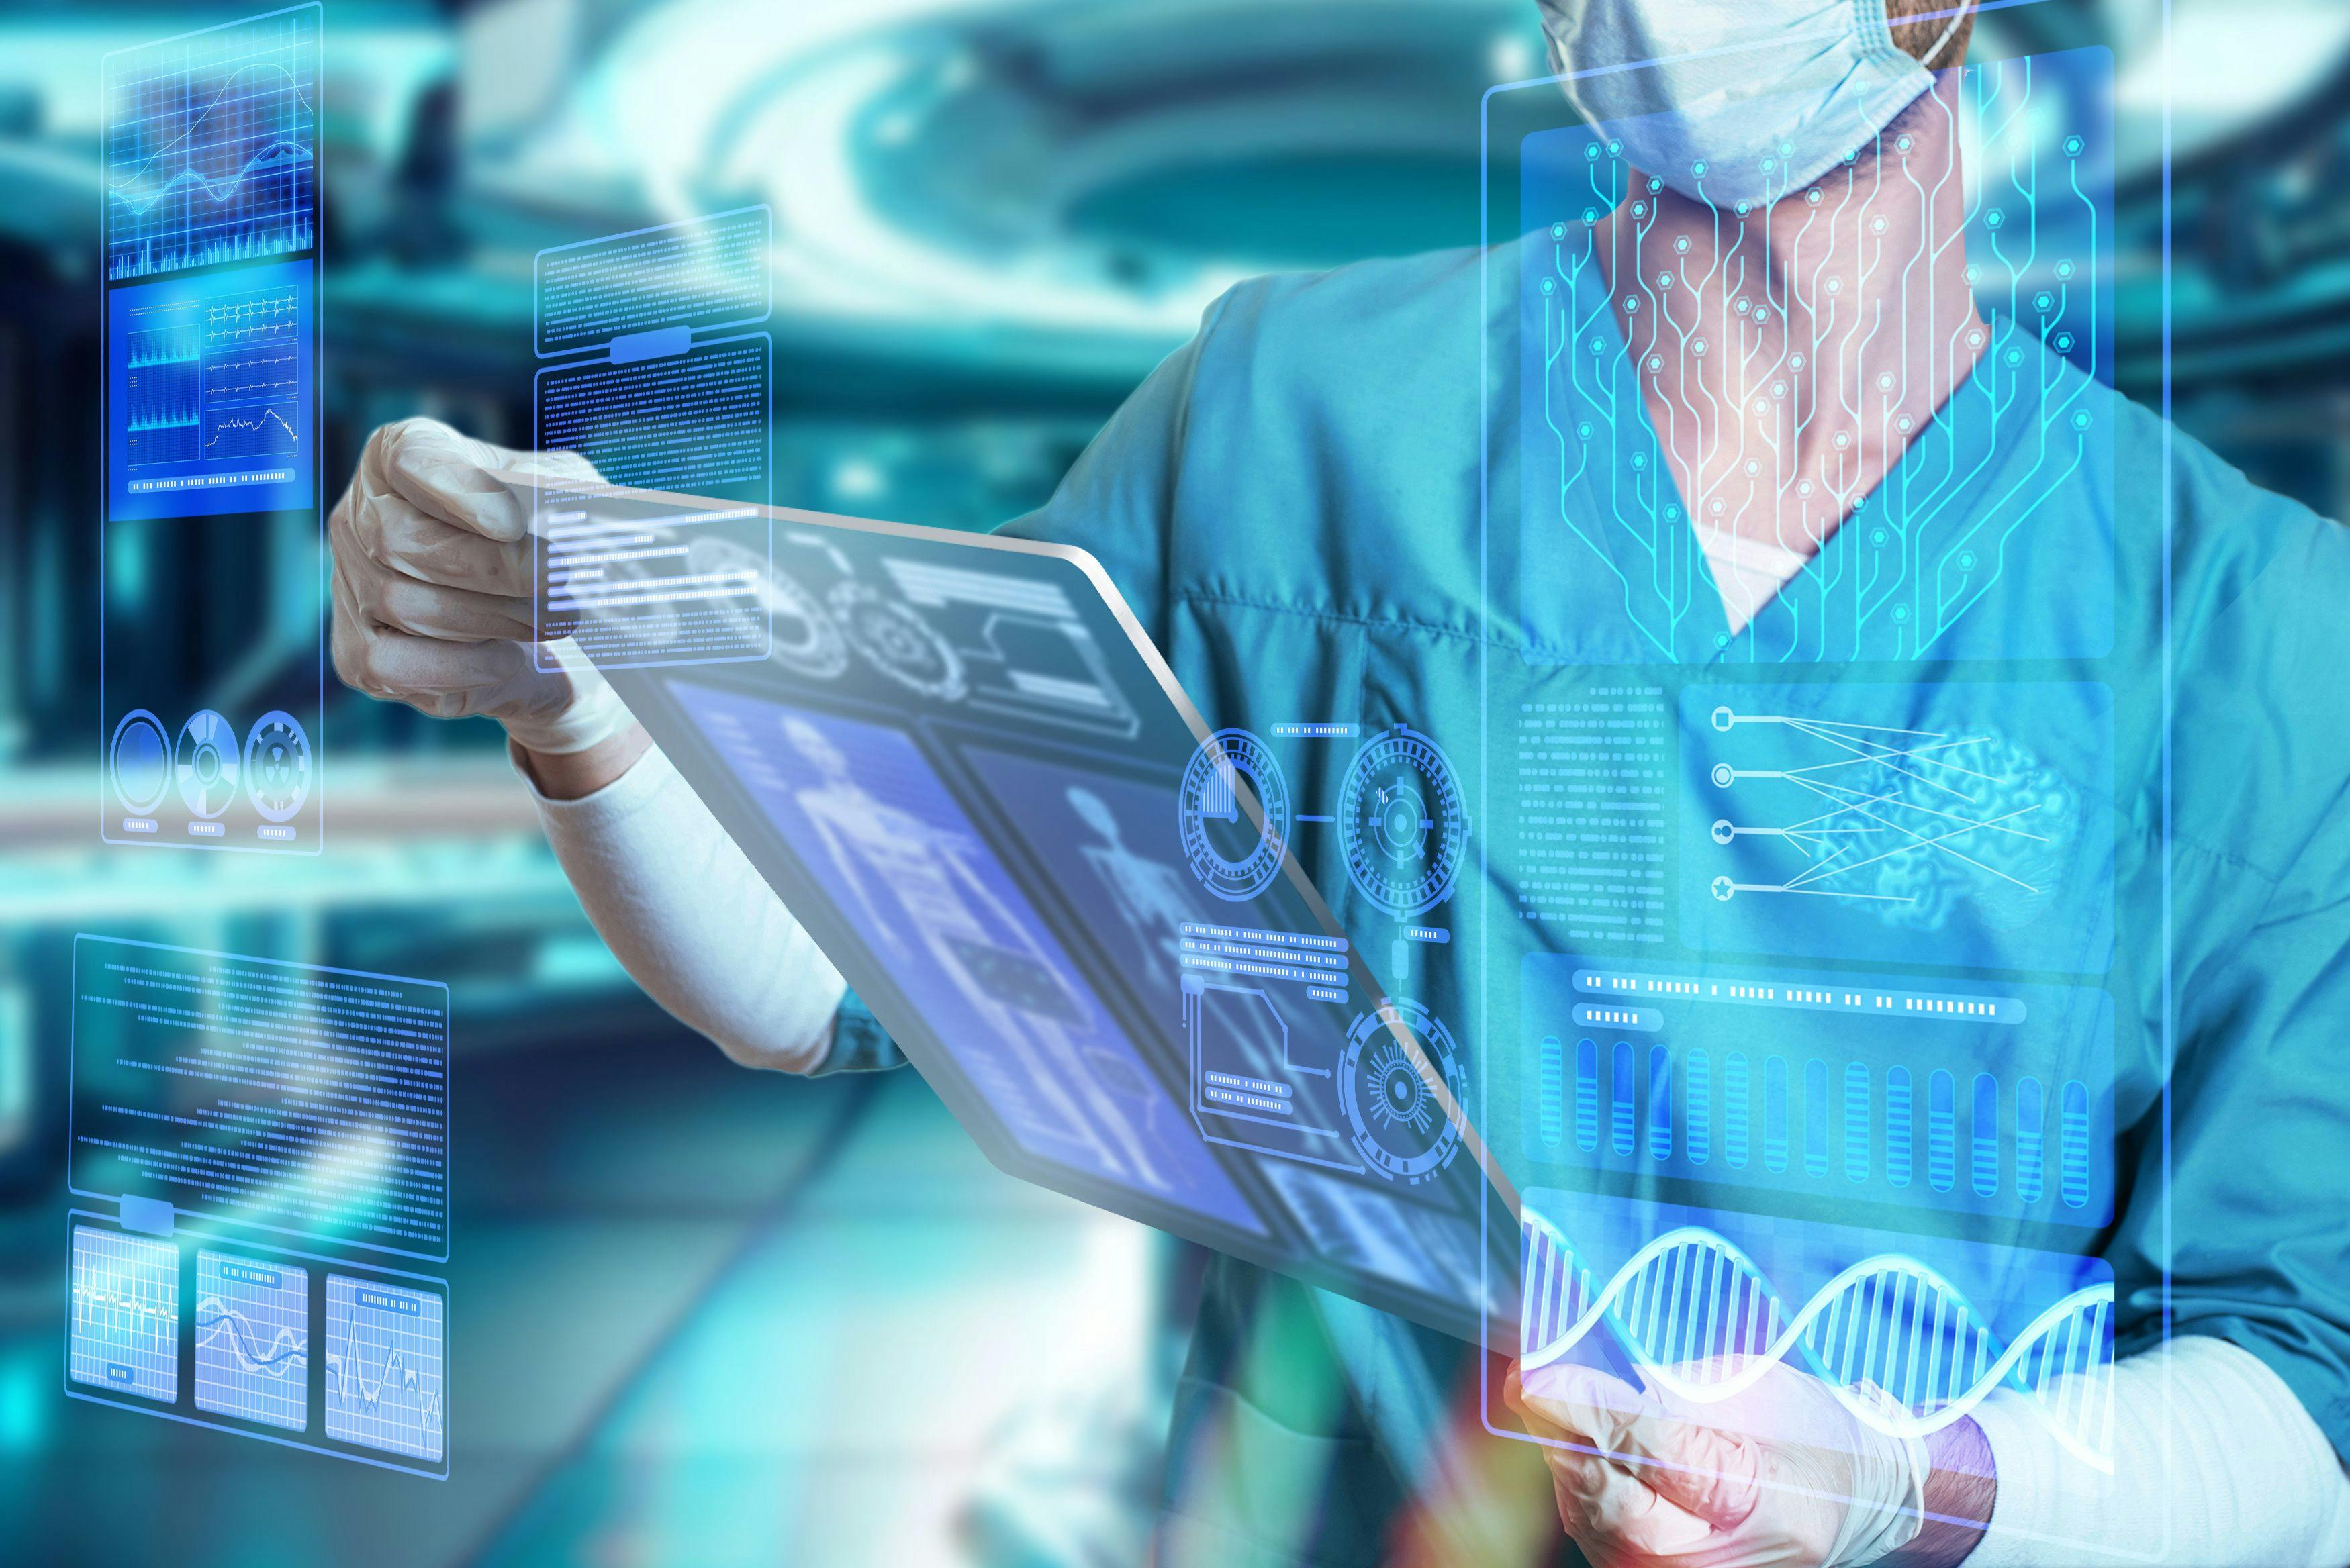 Doctor surgeon in medical apparel working with Futuristic Holographic Interface, showing medical Data in augmented reality from artificial intelligence AI | Image credit: TSViPhoto- stock.adobe.com